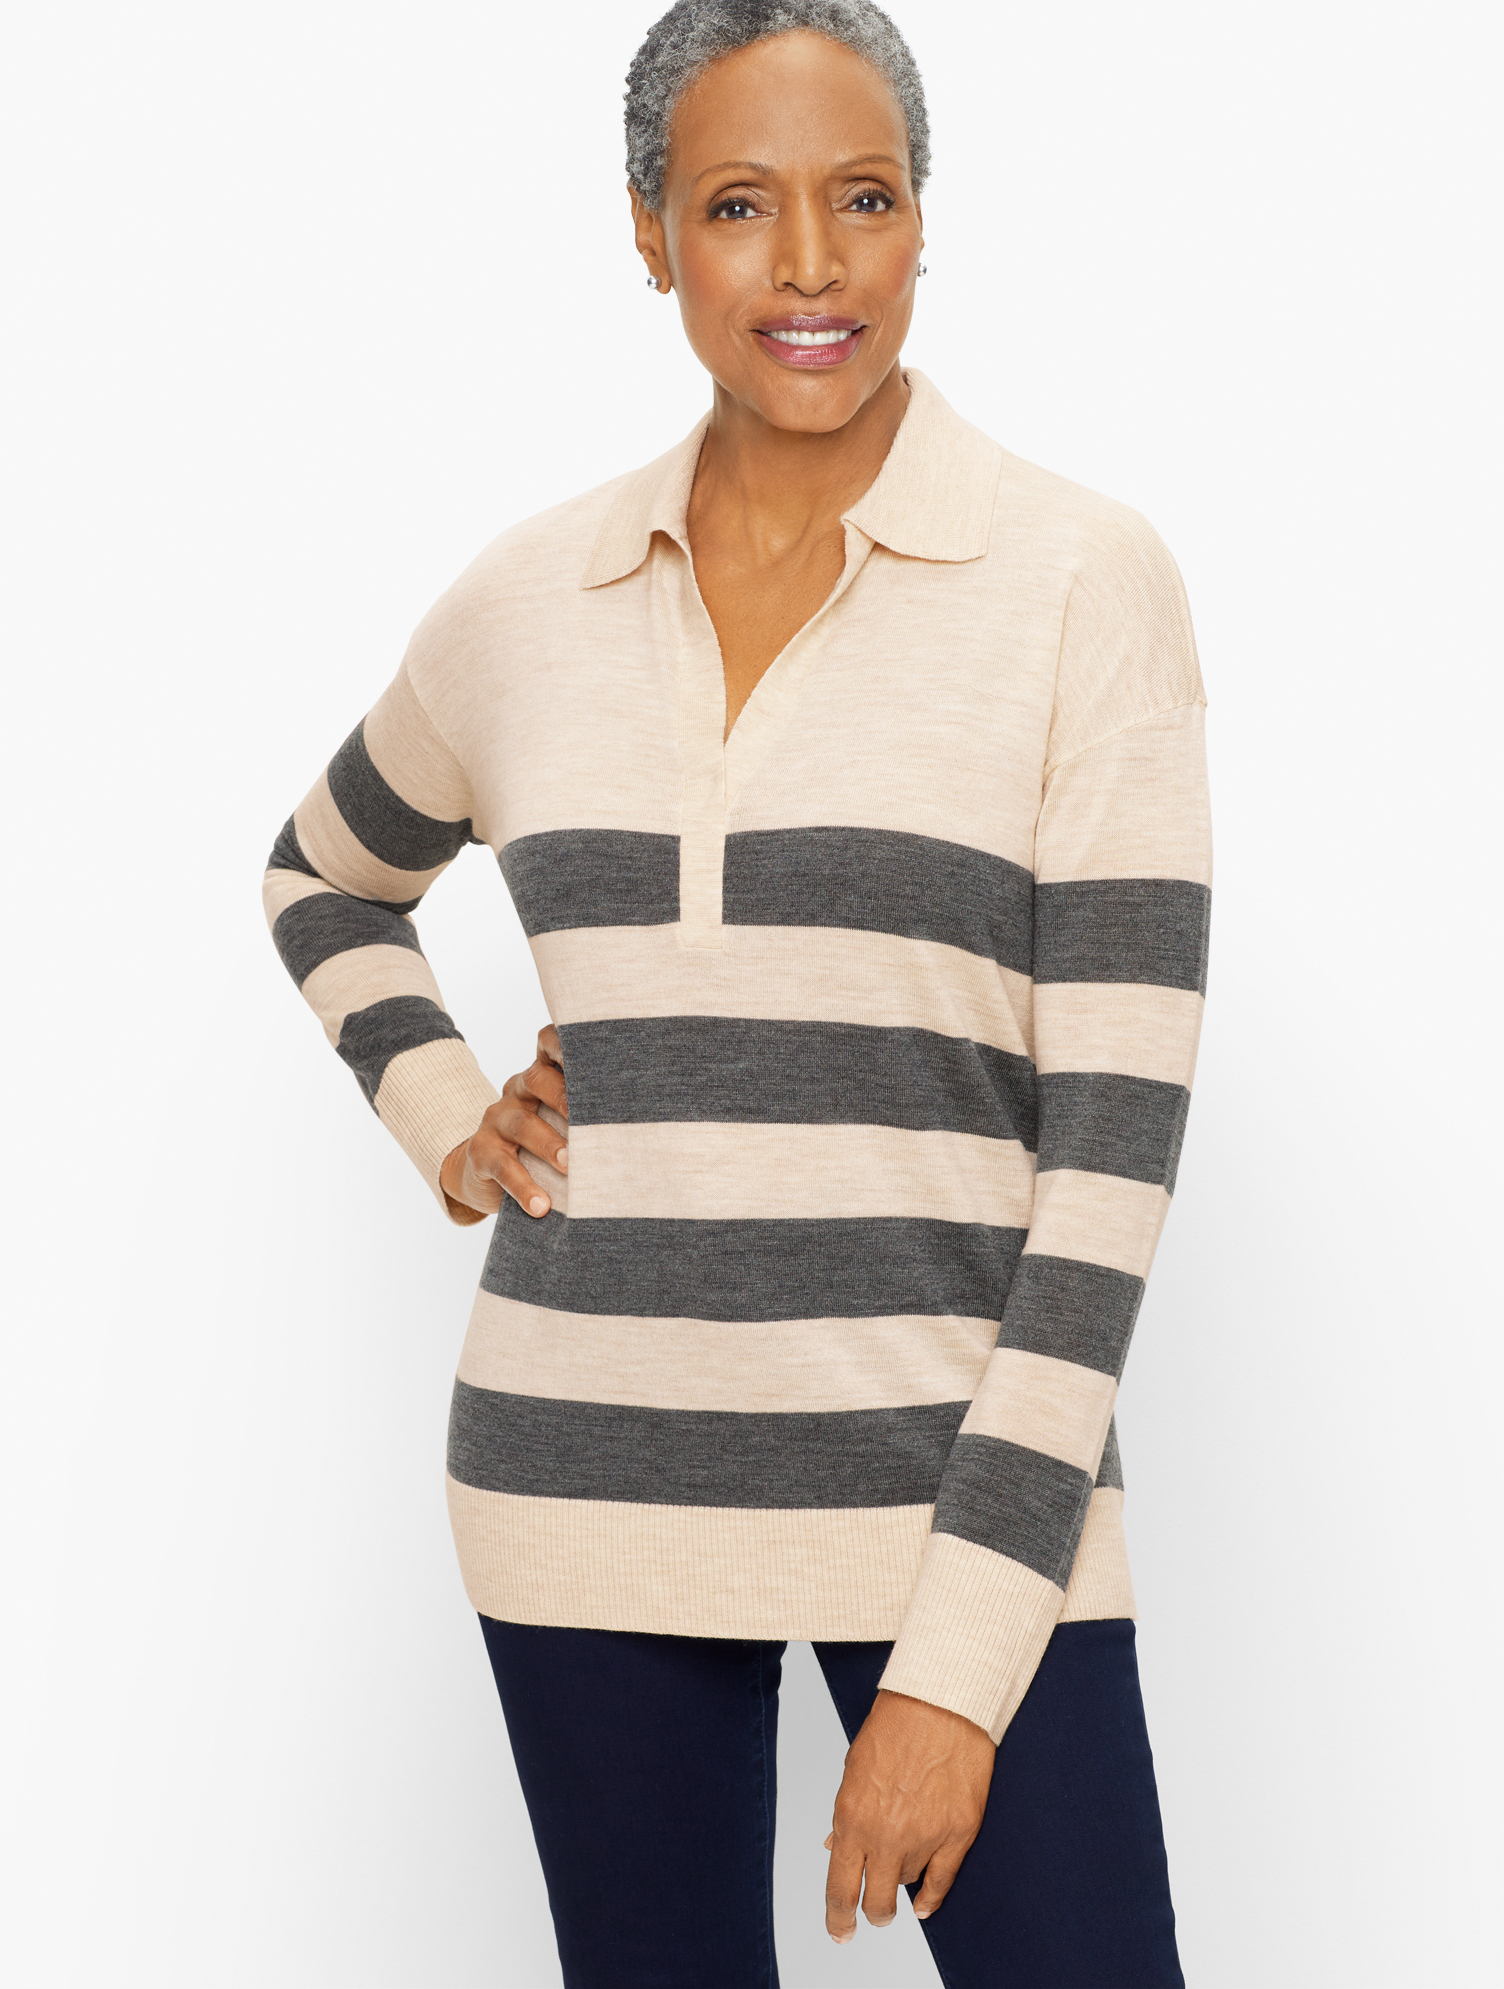 Talbots Merino Wool Johnny Collar Pullover Sweater - Stripe - Oyster/shadow Heather - Xs  In Oyster,shadow Heather